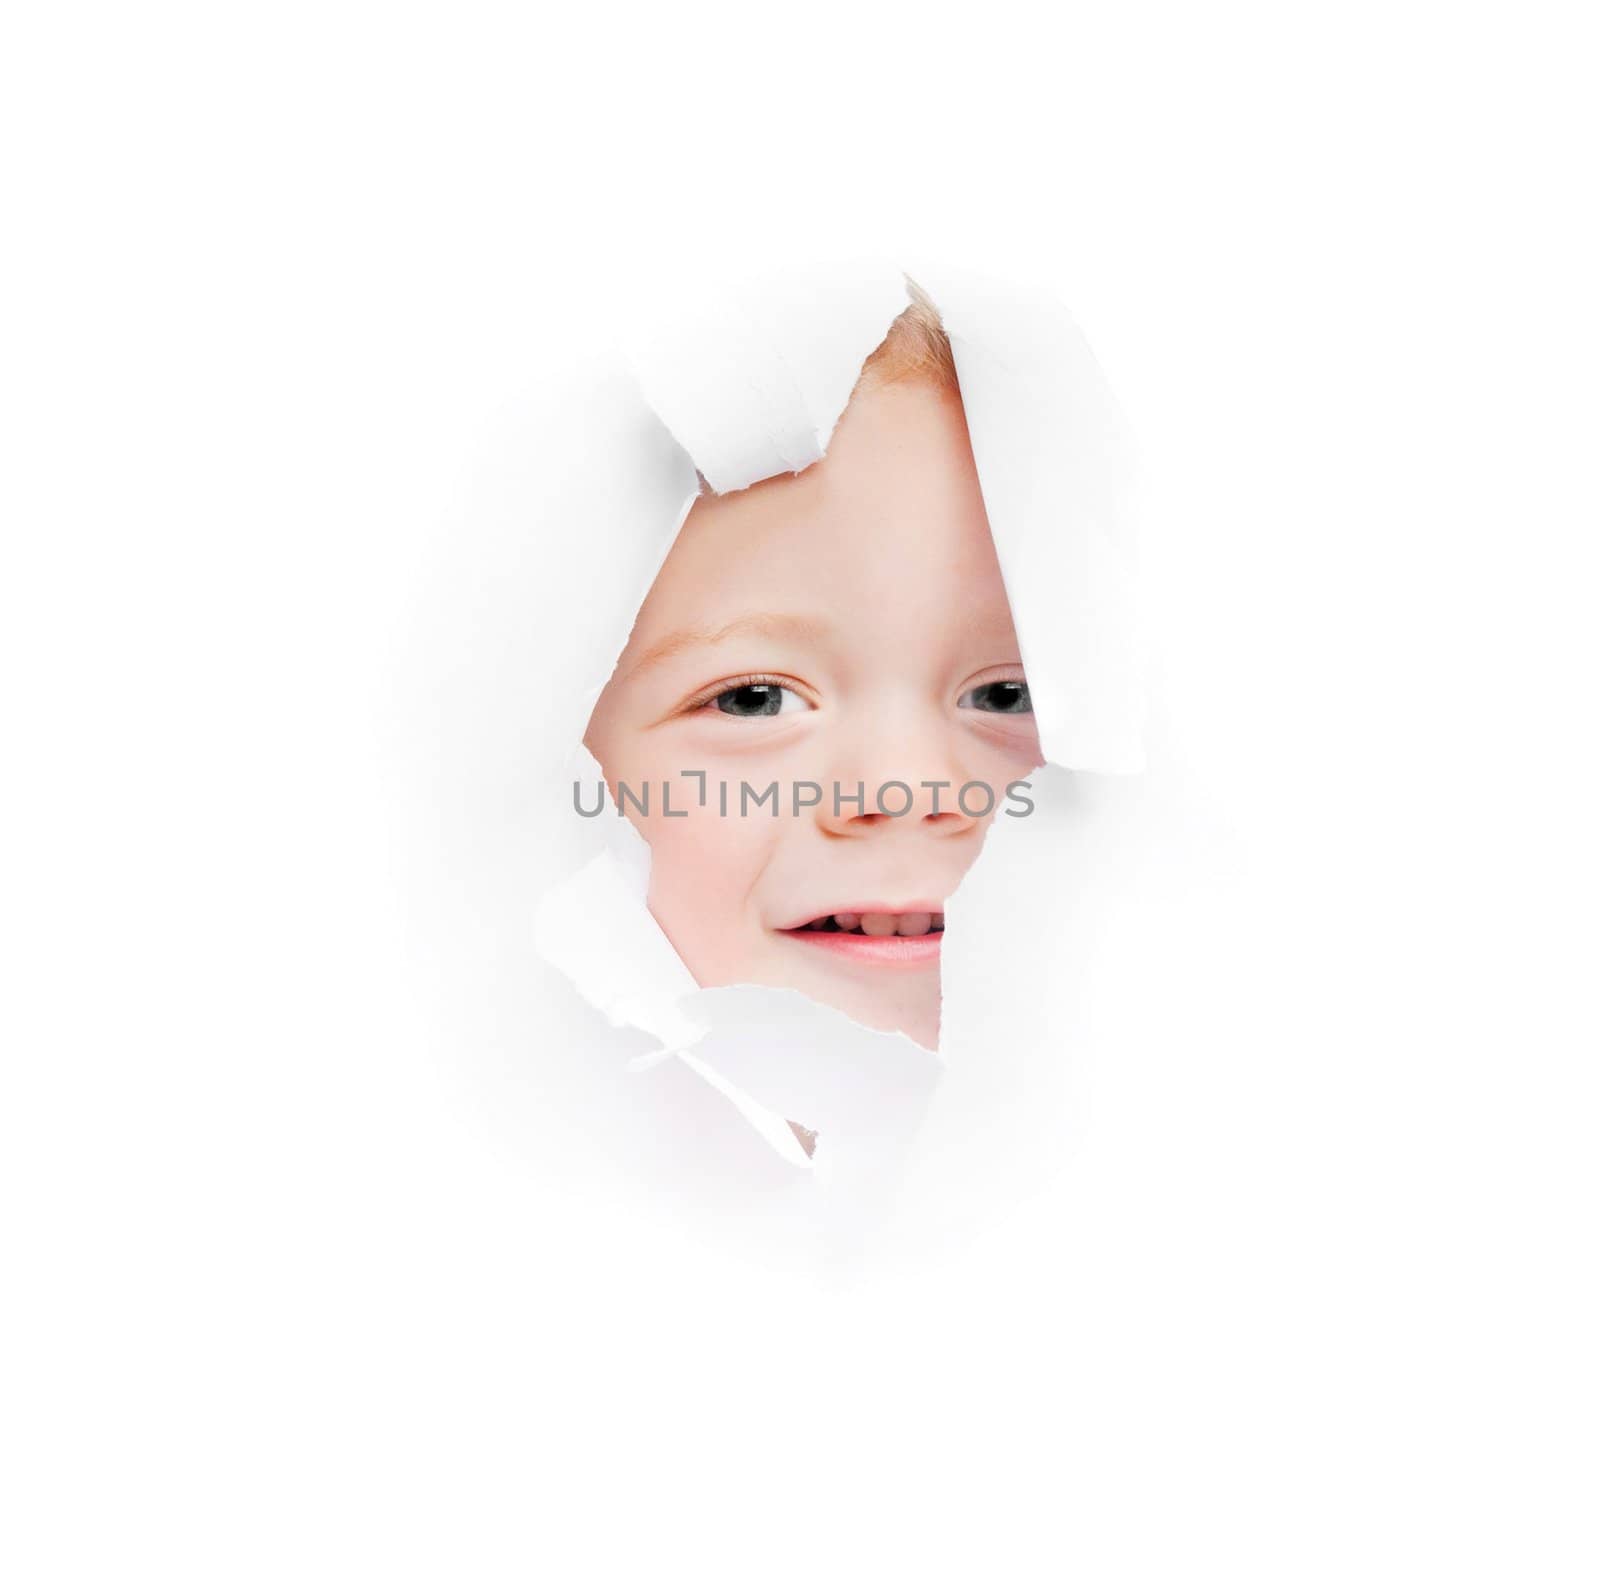 child looks in a hole in a sheet of a paper